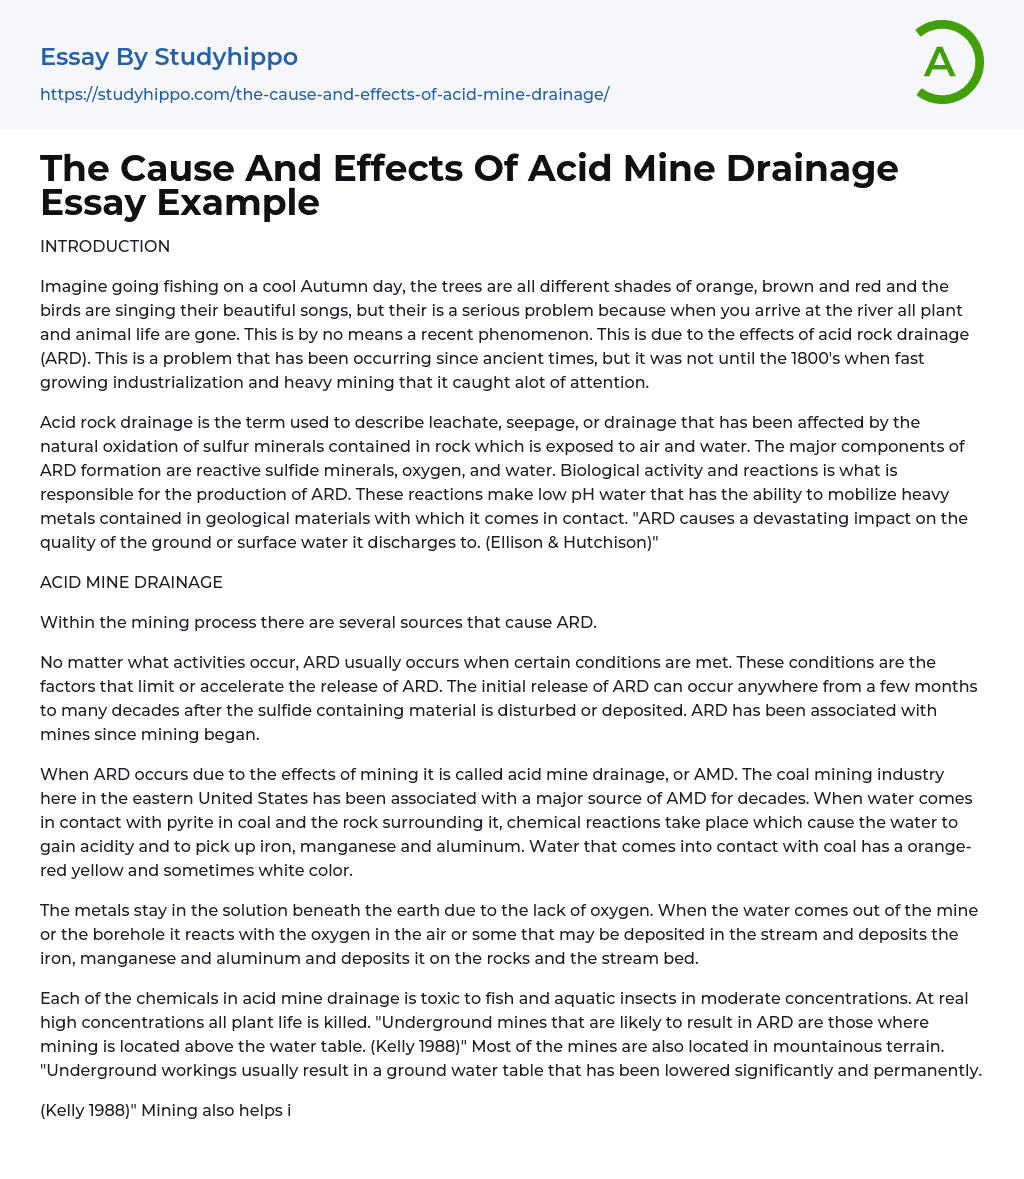 The Cause And Effects Of Acid Mine Drainage Essay Example